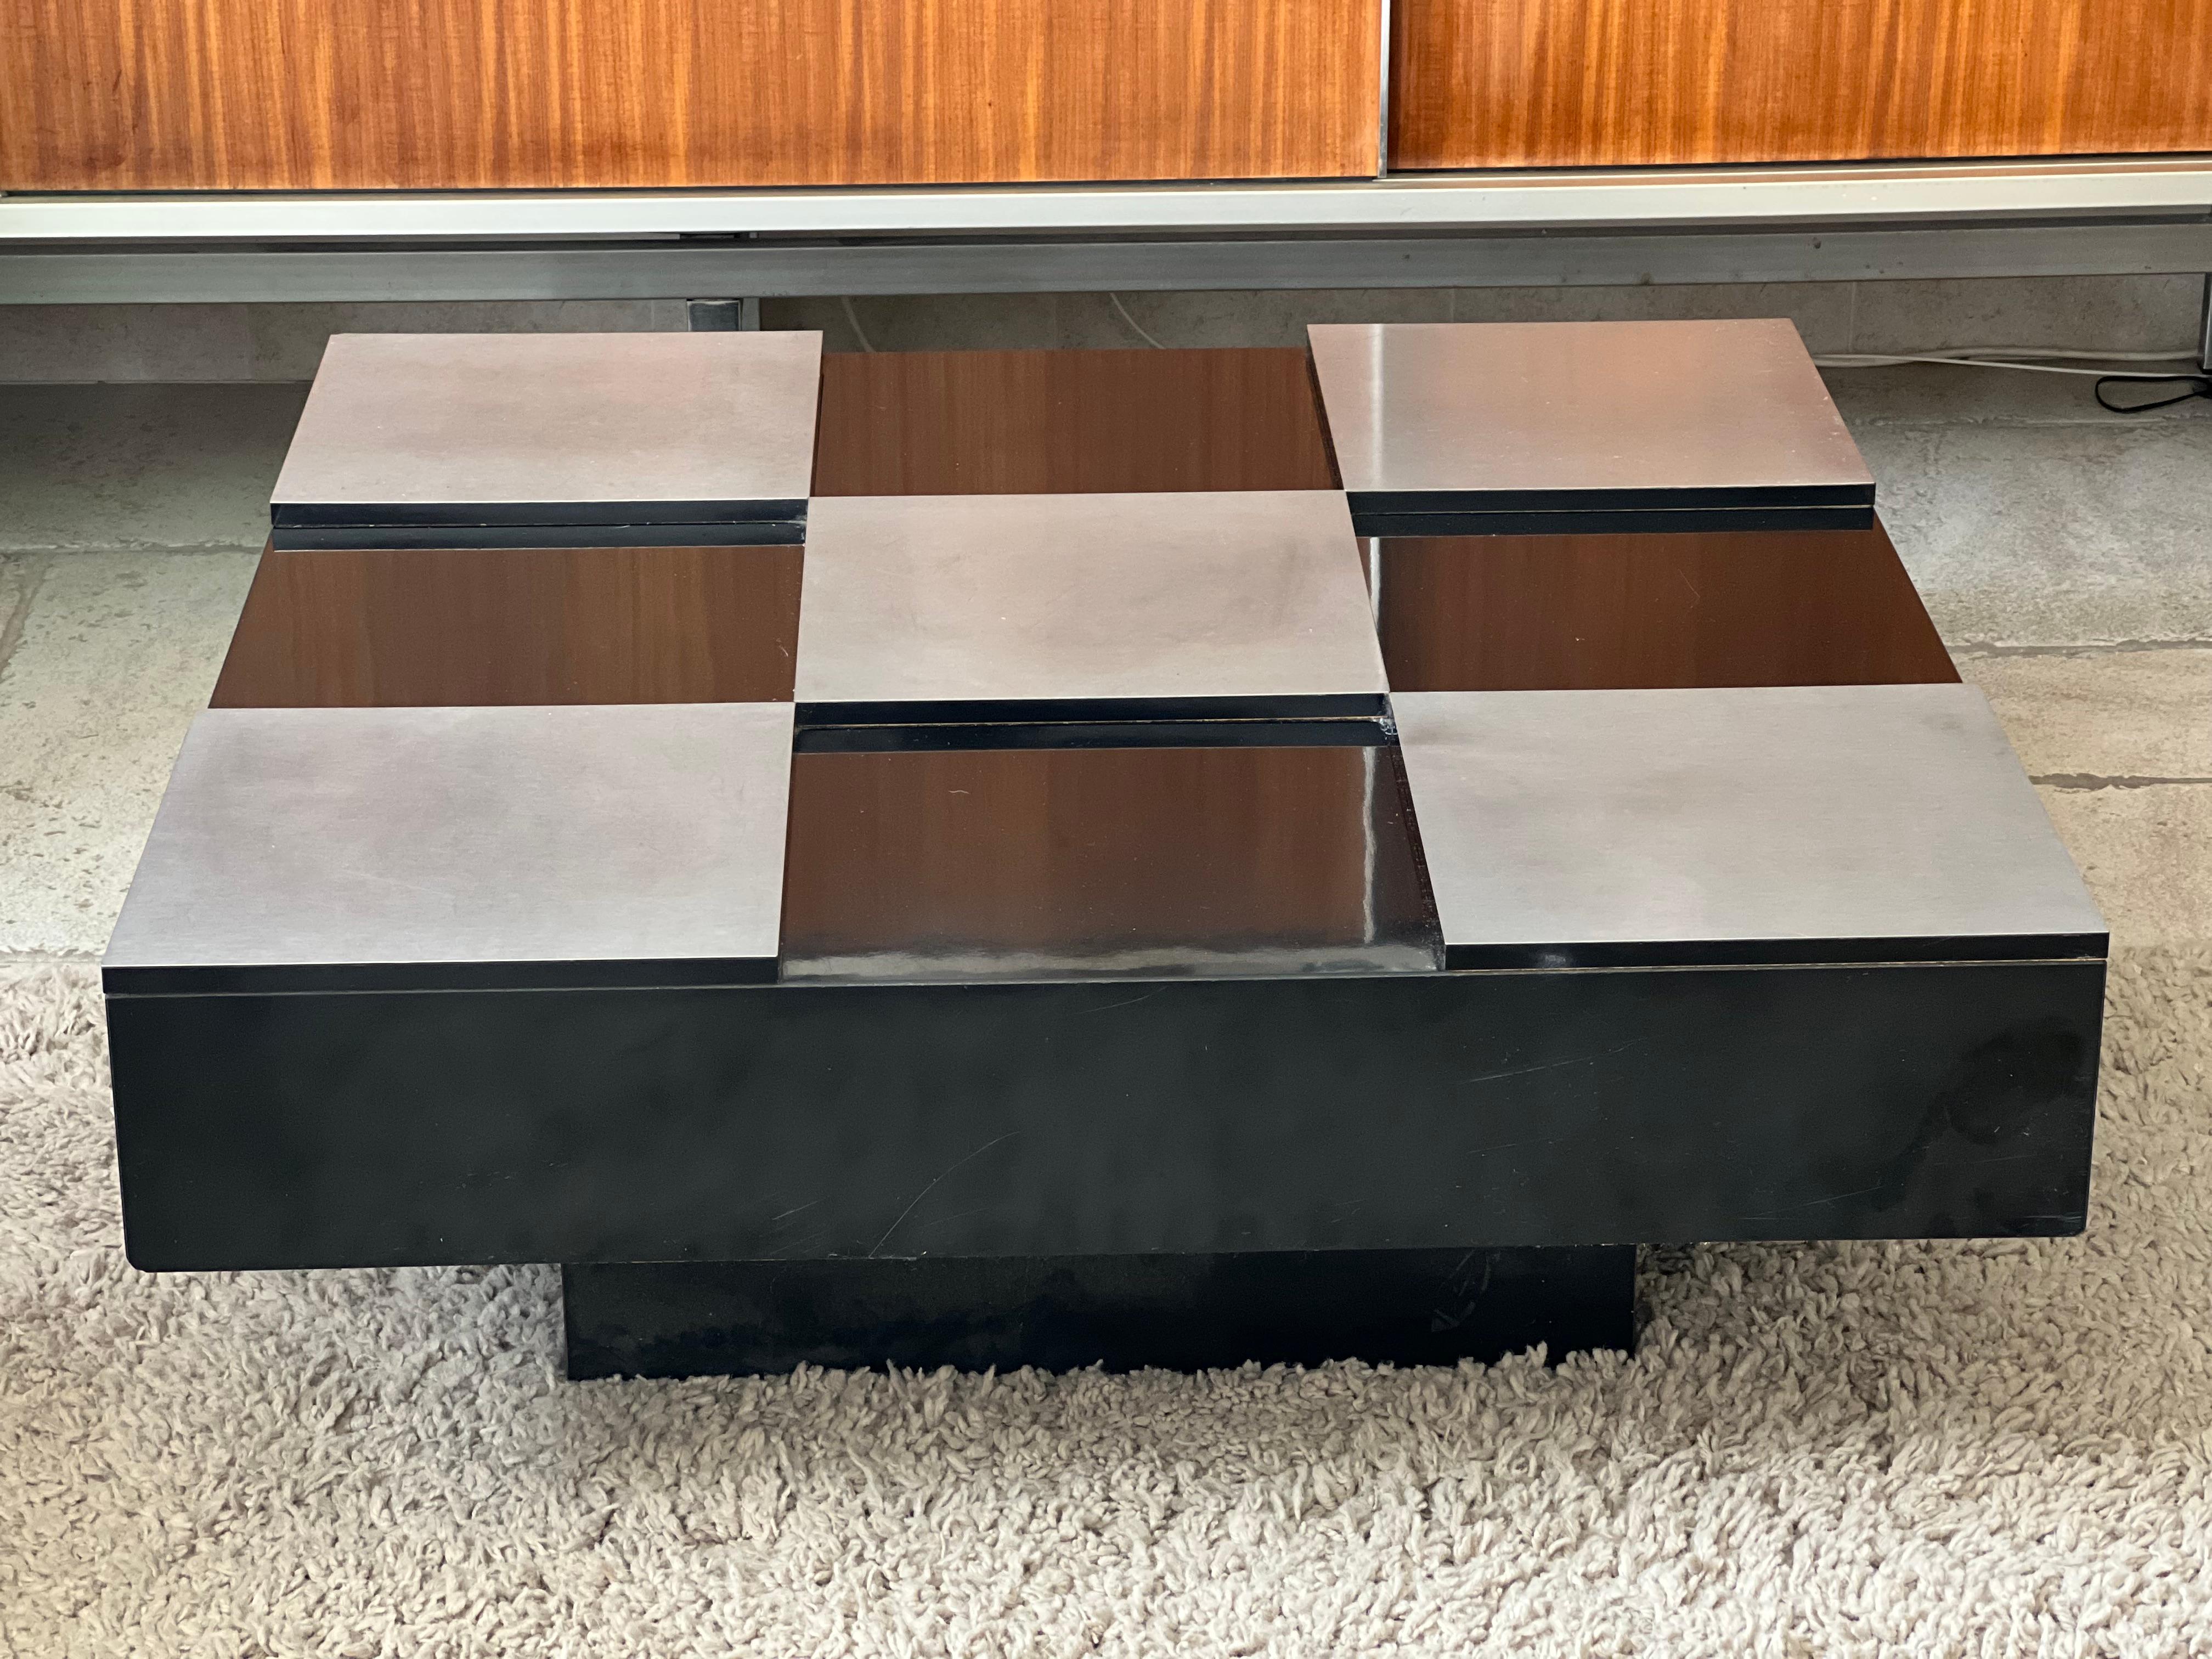 Late 20th Century Italian Design, Coffee Table in the style of Willy Rizzo 1970 For Sale